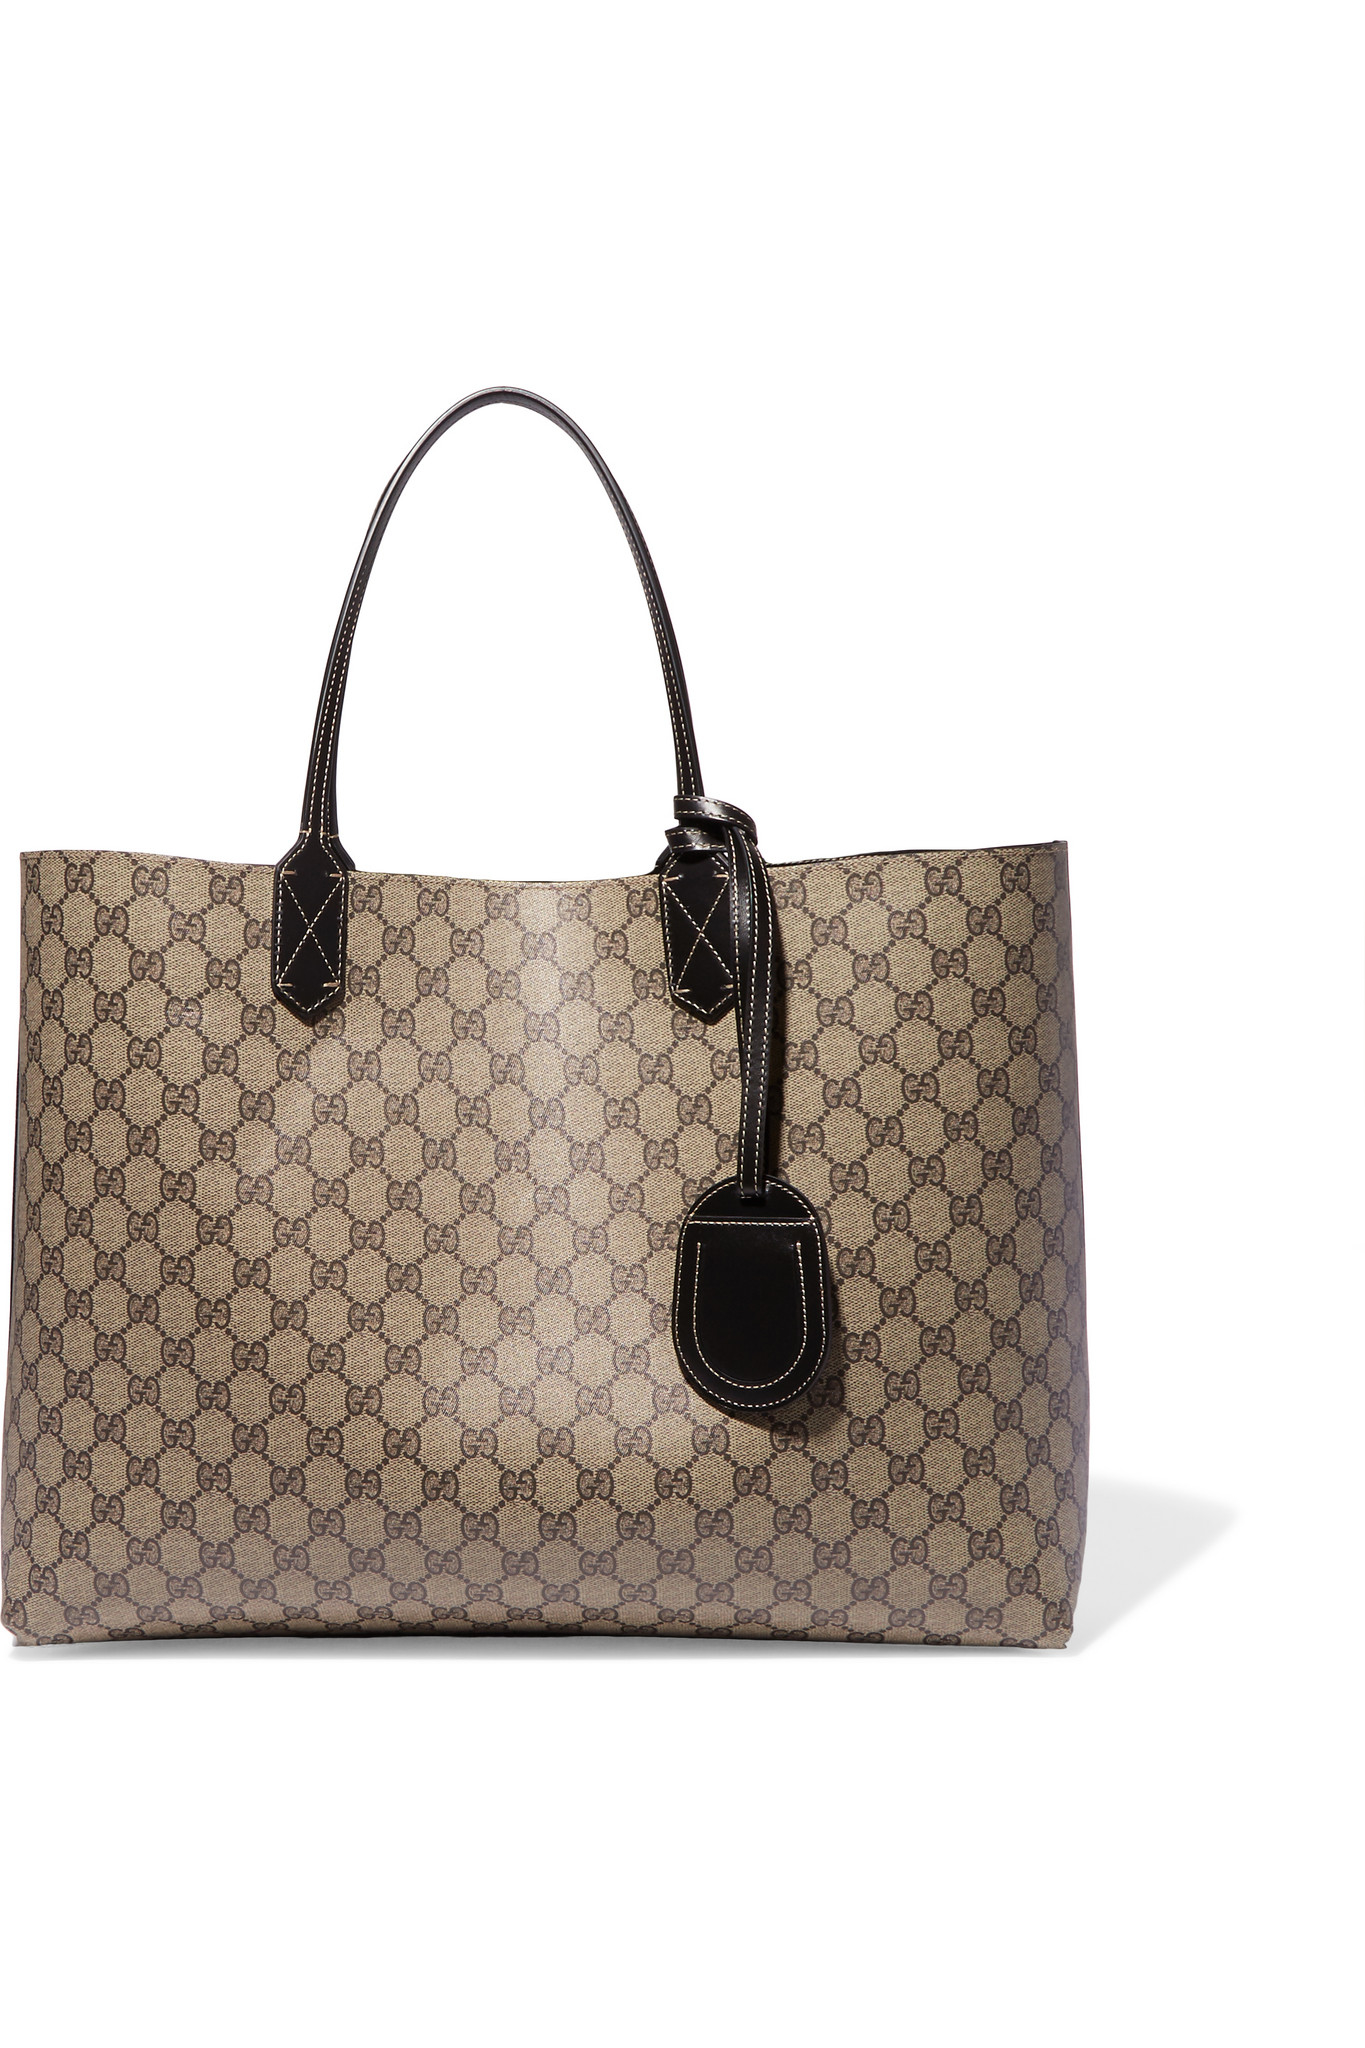 Gucci Turnaround Medium Reversible Leather Tote in Natural | Lyst